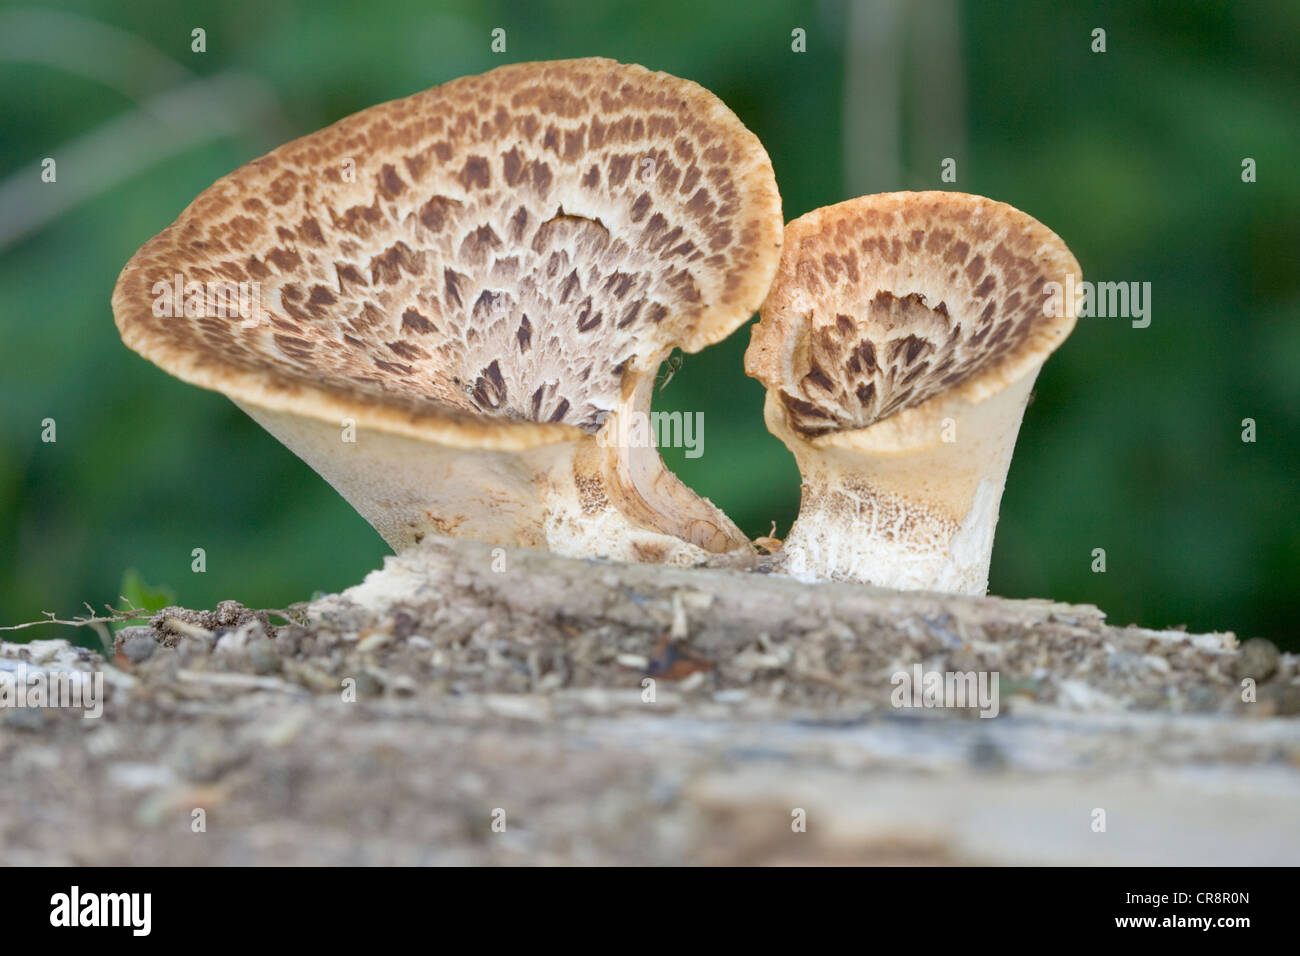 Dryad’s saddle, Polyporus squamosus growing on dead trunk of a broad leaf tree. Berkshire, UK. Stock Photo